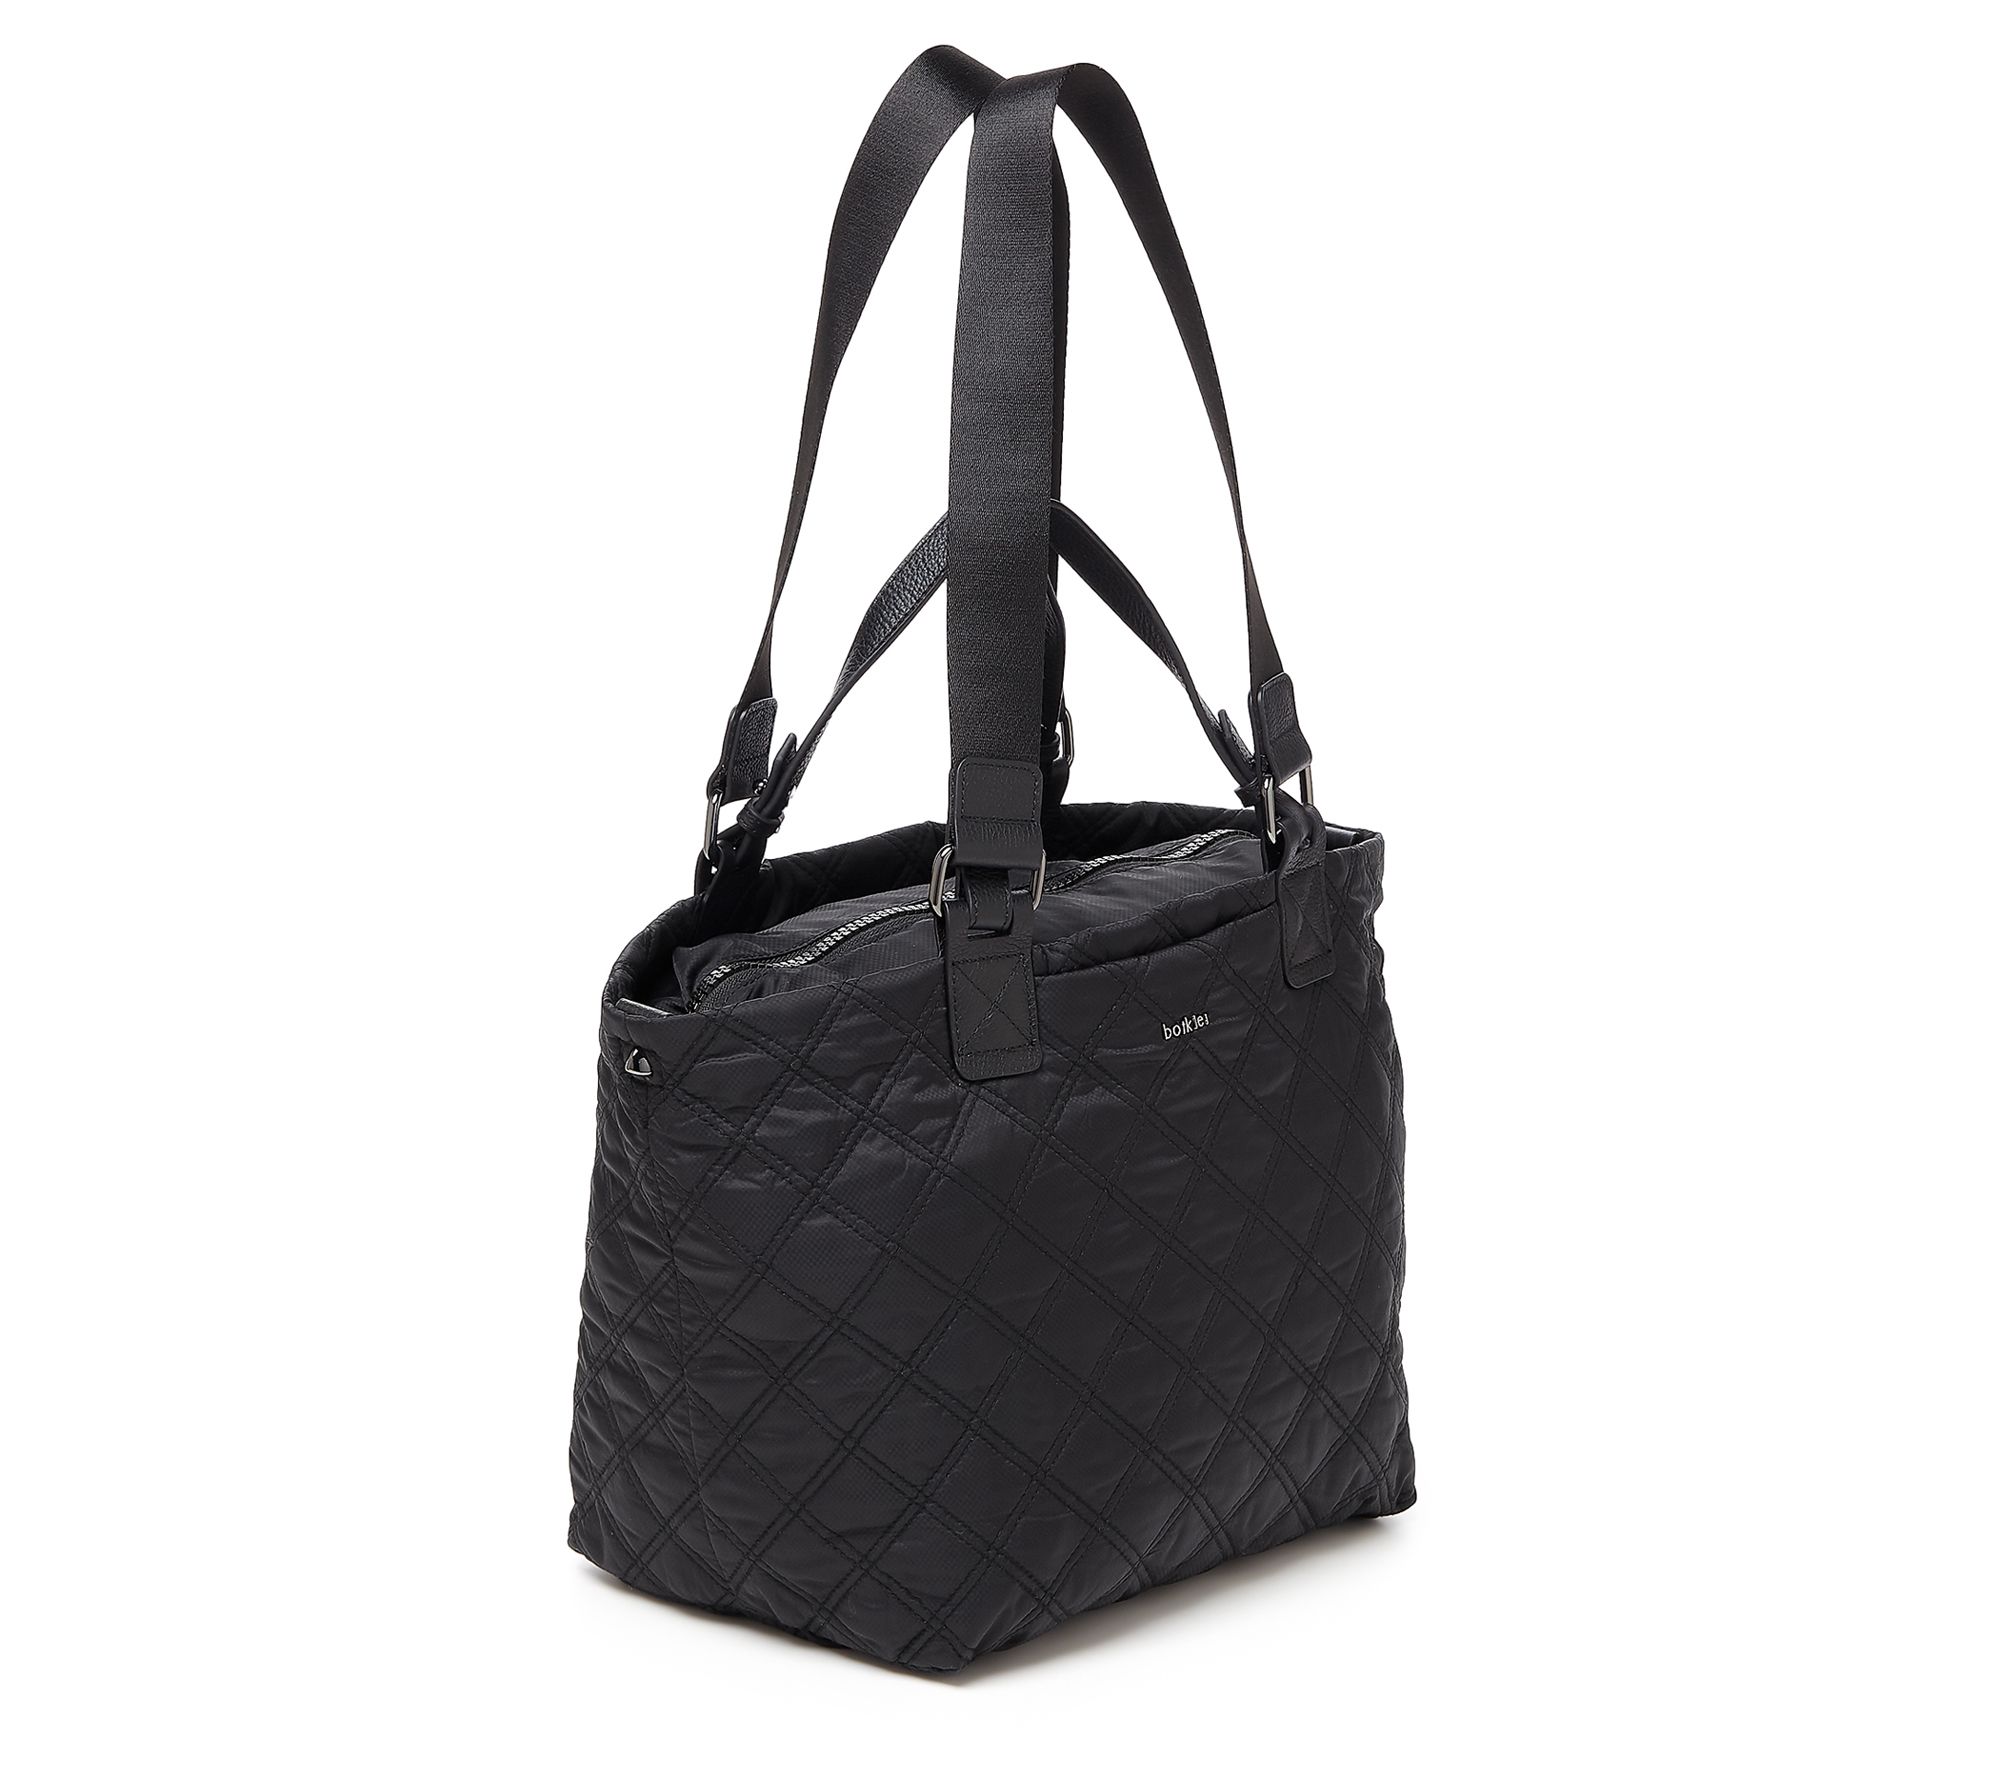 Botkier Carlisle Small Quilted Nylon Tote - QVC.com